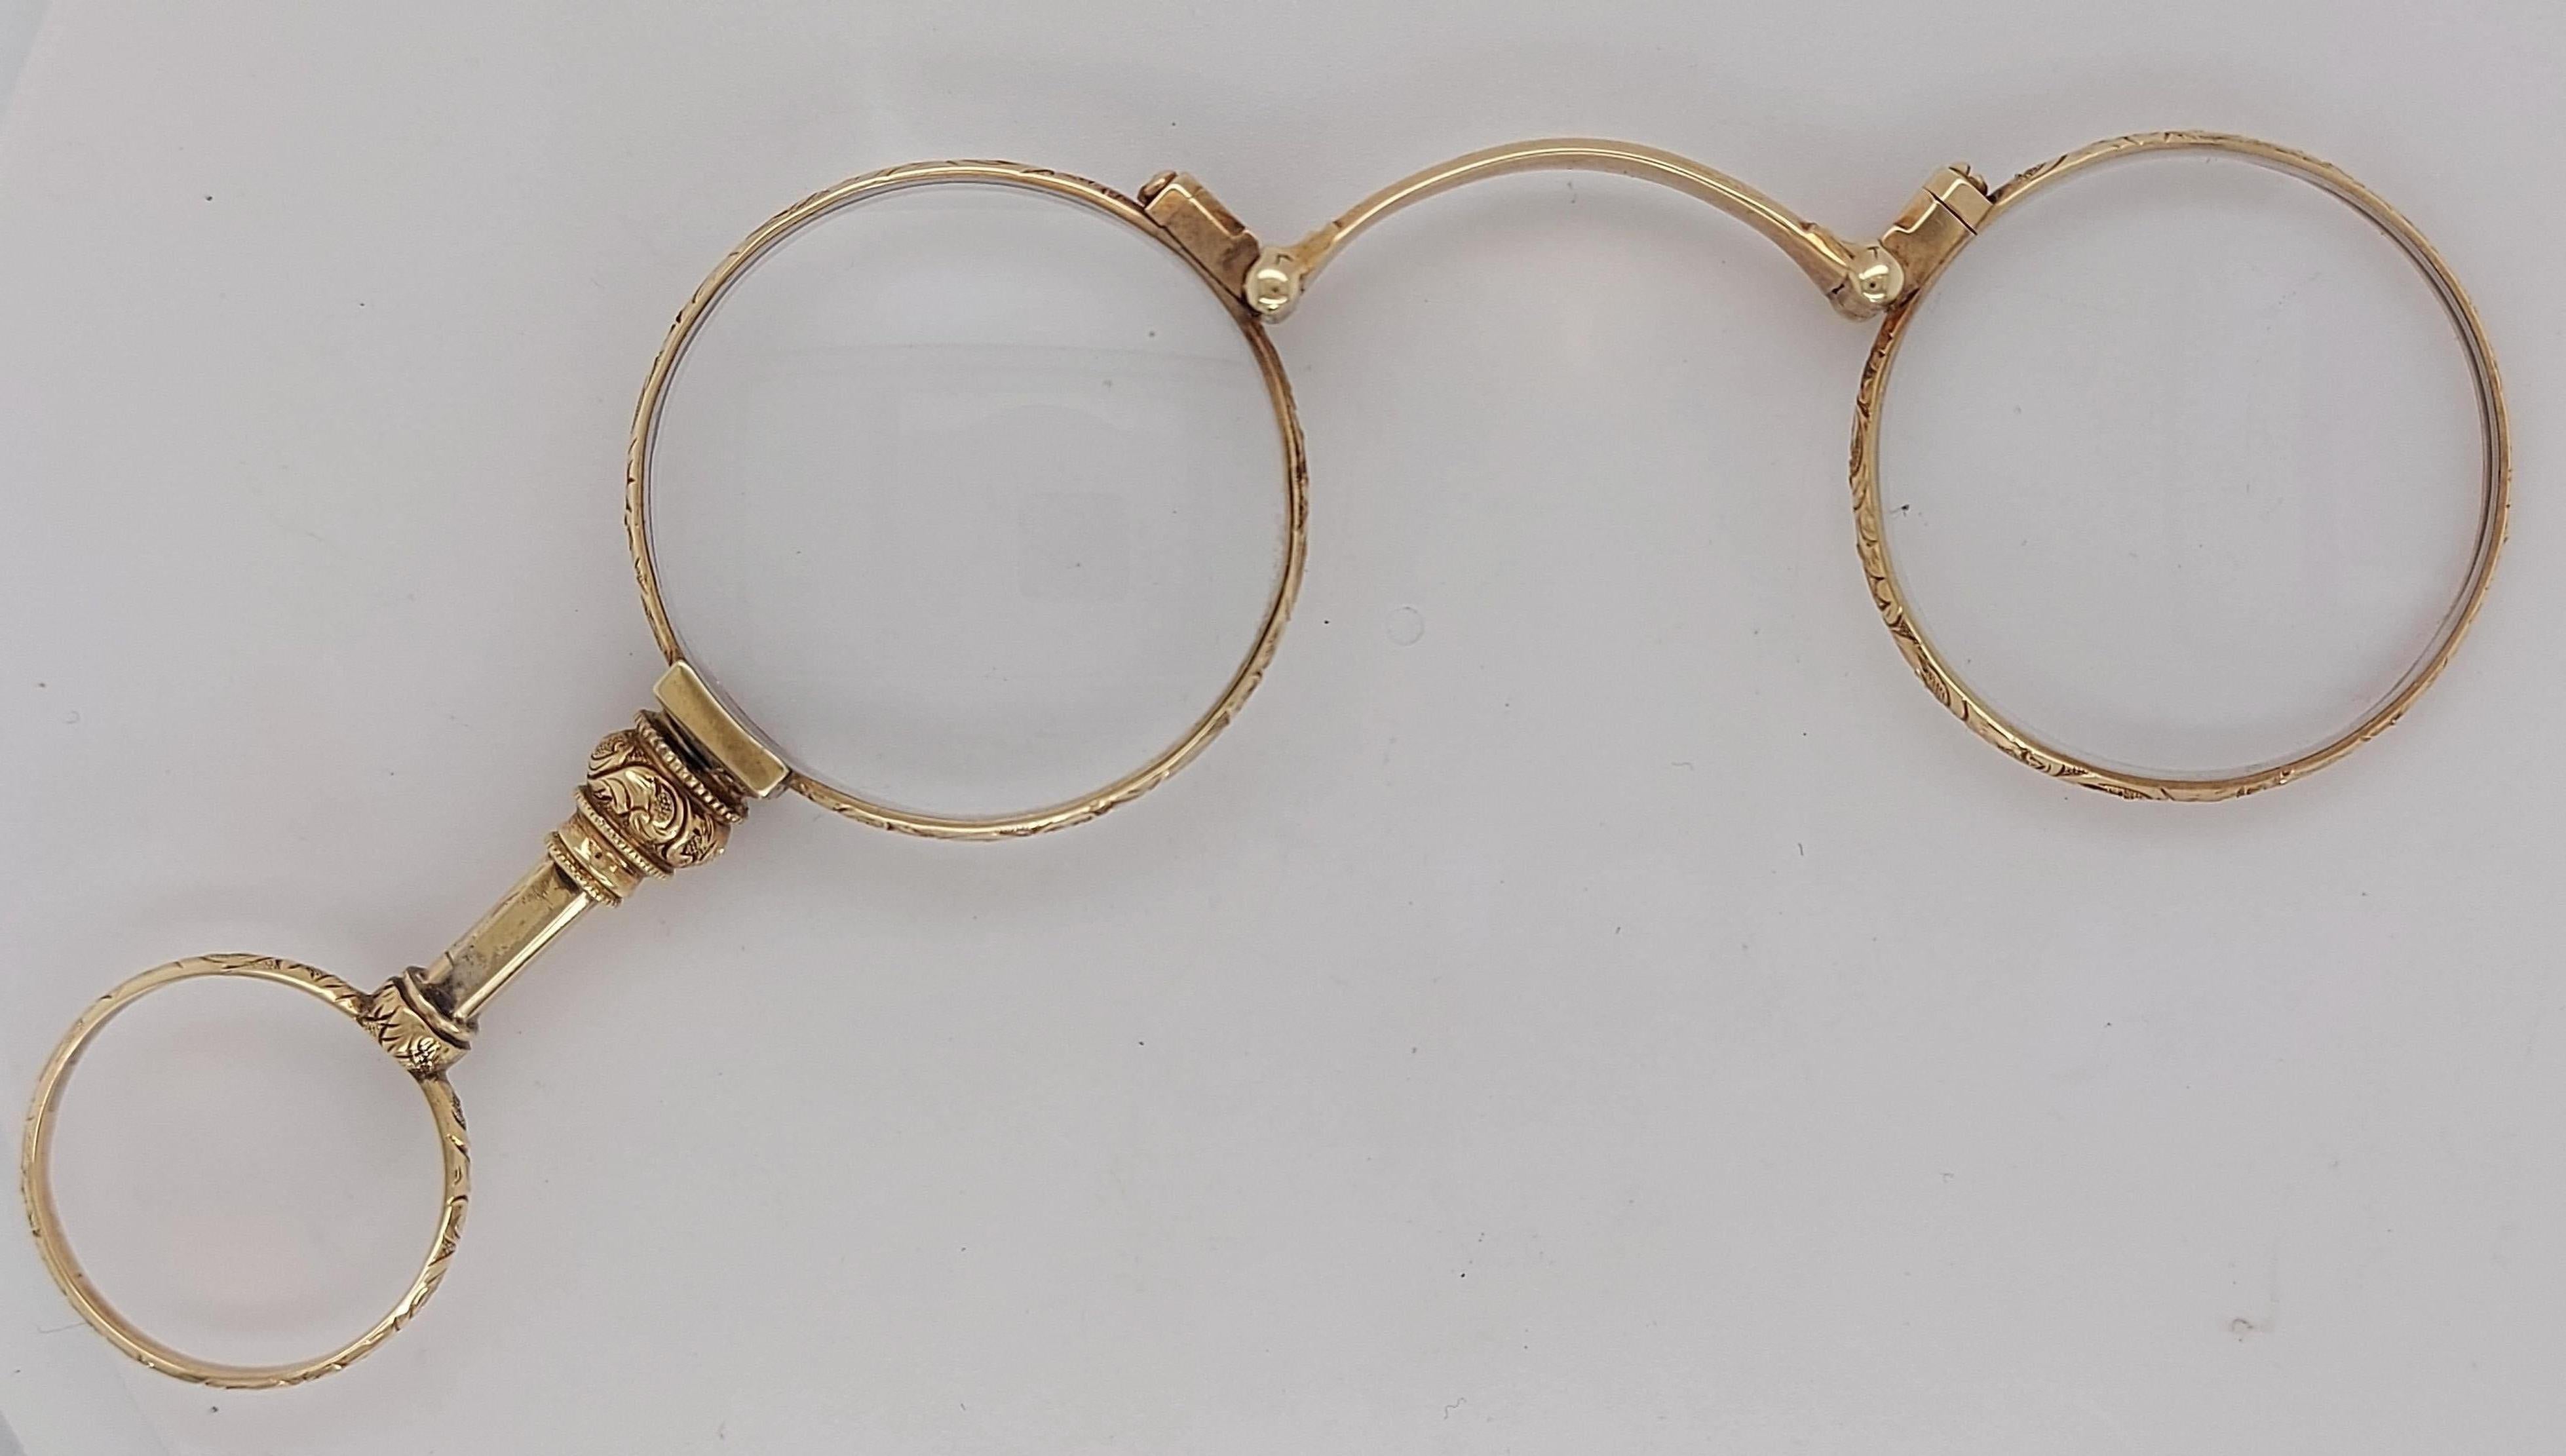 Old - World Style Antique 14kt Yellow Gold Lorgnette Handle Opera Glasses

A real collector item

Material: 14kt Yellow Gold

Total weight: 27.6 gram / 0.975 oz / 17.7 dwt

Measurements: 34 mm x 77 mm, Glass diameter: 33 mm